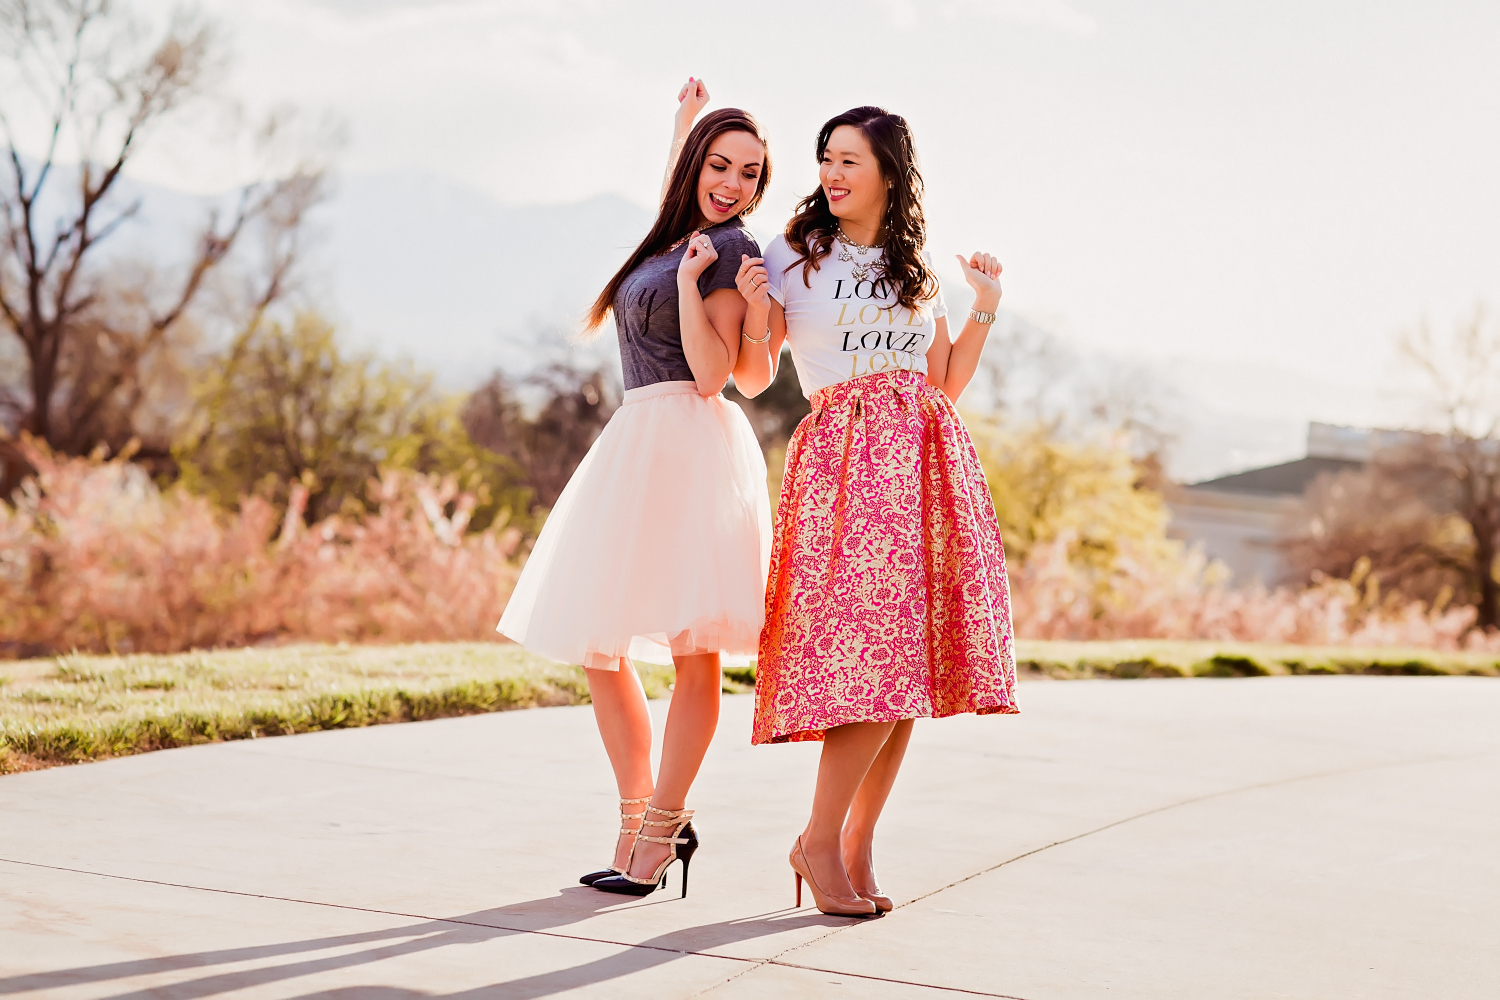 Sandy a la Mode | Fashion Blogger Graphic Tee and Pretty Skirt with Lovely Deseret